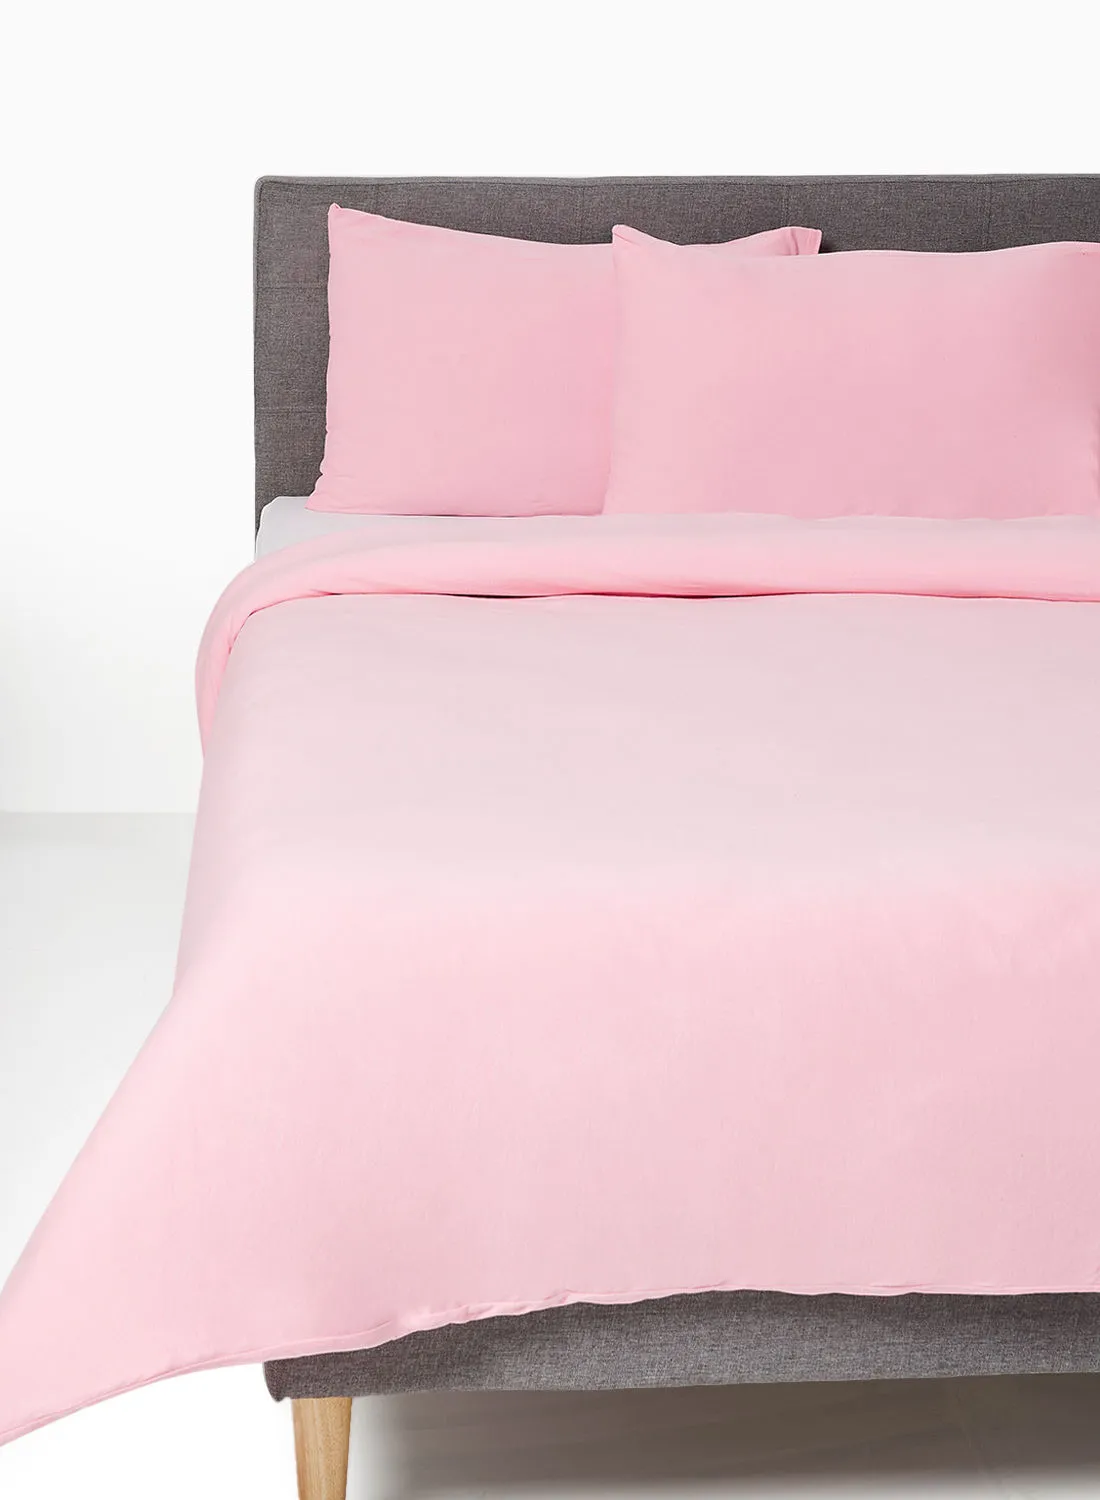 Noon East Duvet Cover Set- With 1 Duvet Cover 160X200 Cm And 2 Pillow Cover 48X74+12 Cm - For Twin Size Mattress - 100% Cotton 140 GSM Pink Twin